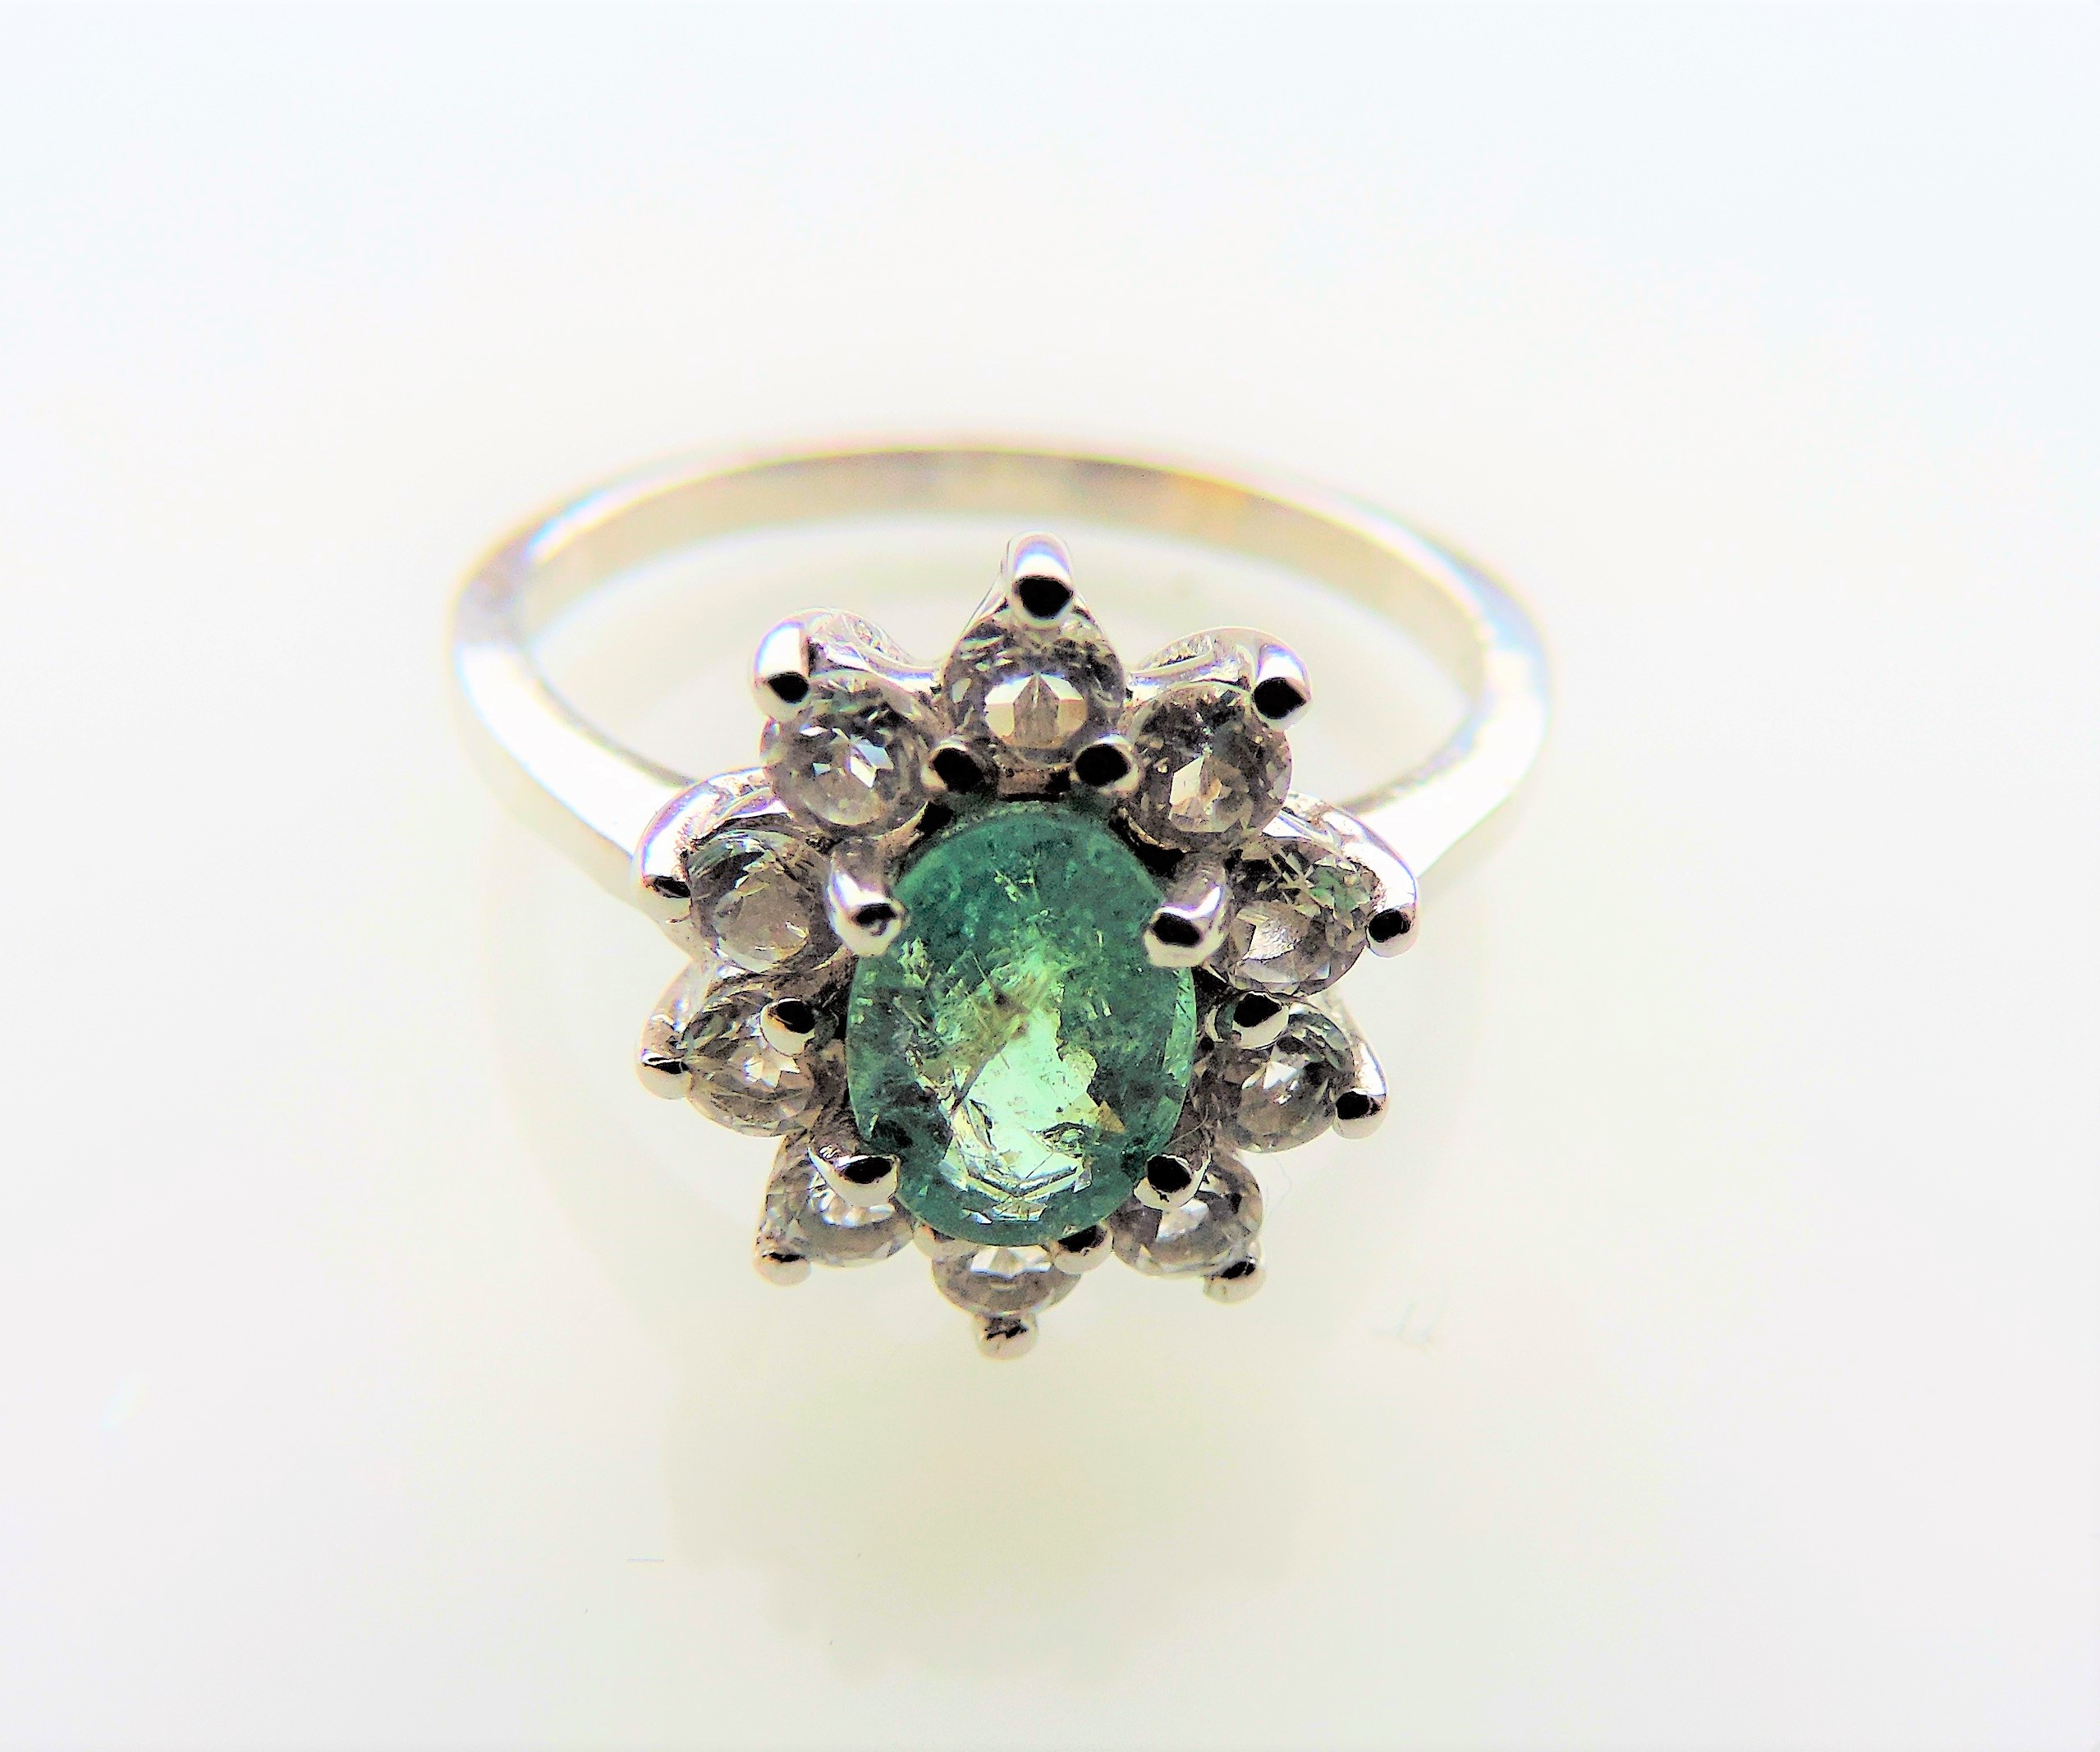 1.5 carat Green and White Topaz Ring - Image 5 of 6